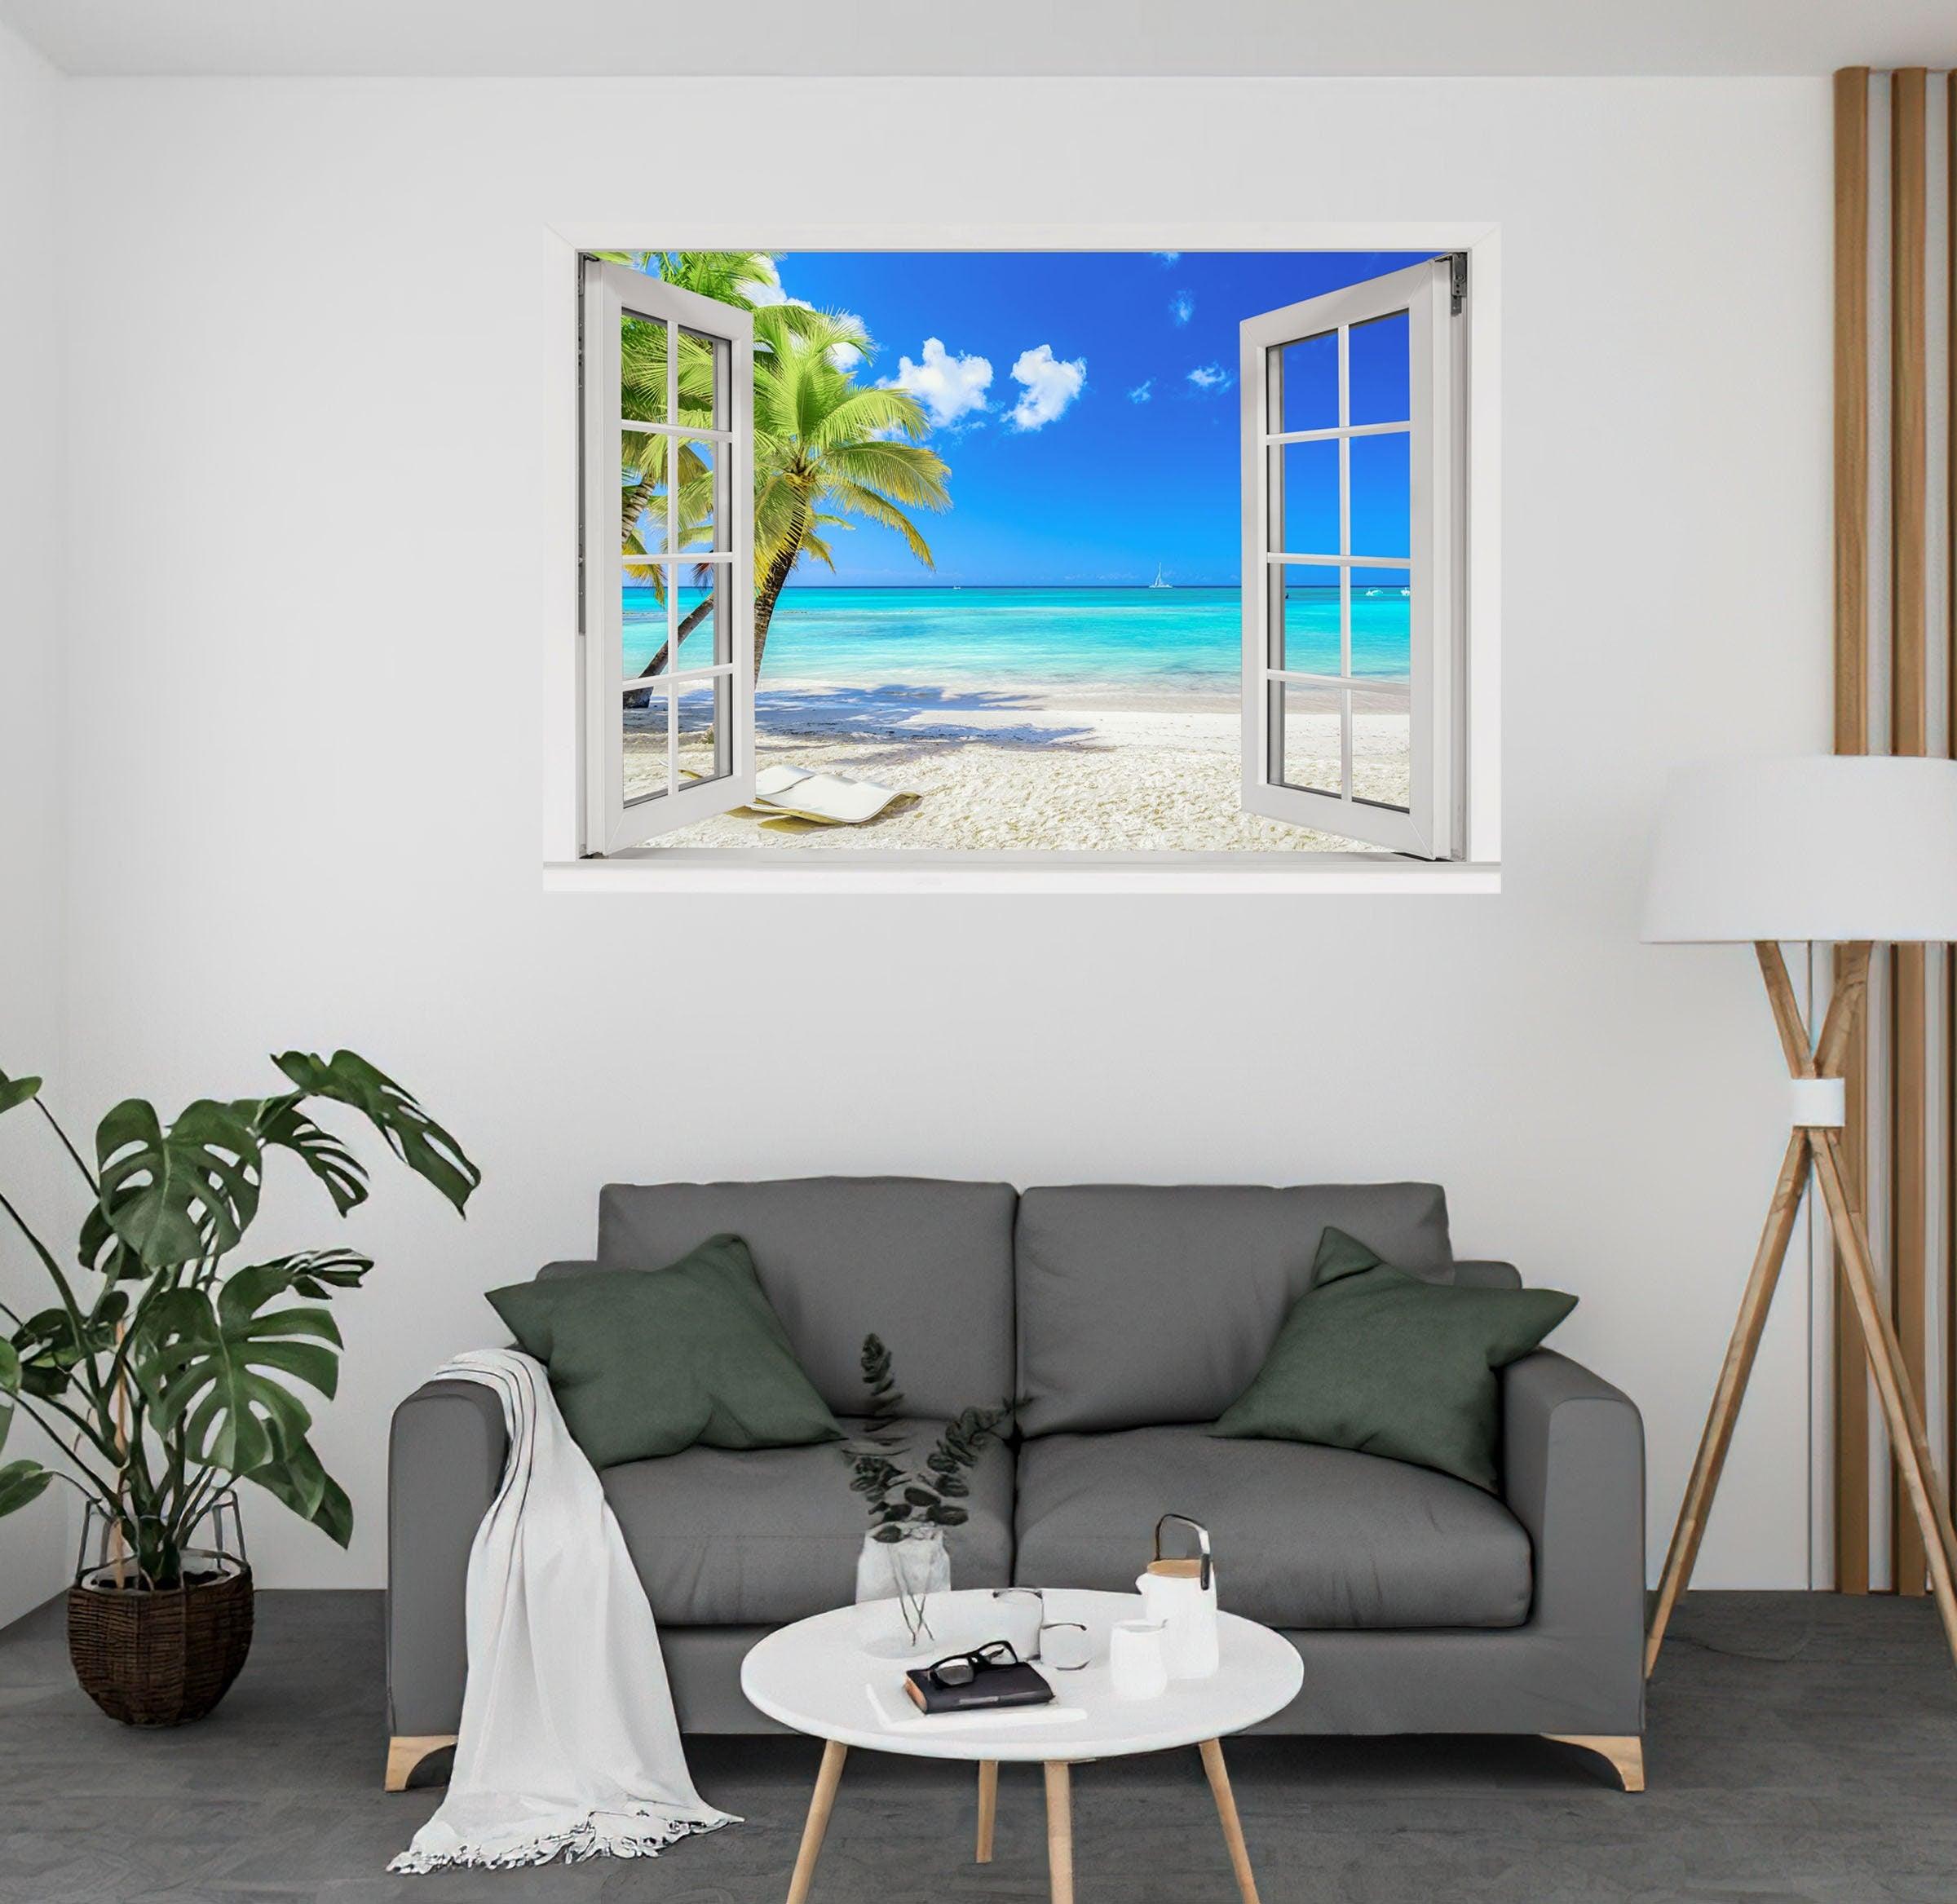 Window Scape Tropical #6 Window Decal Sticker Mural Beach Removable Fabric Window Frame Office Bedroom 3D